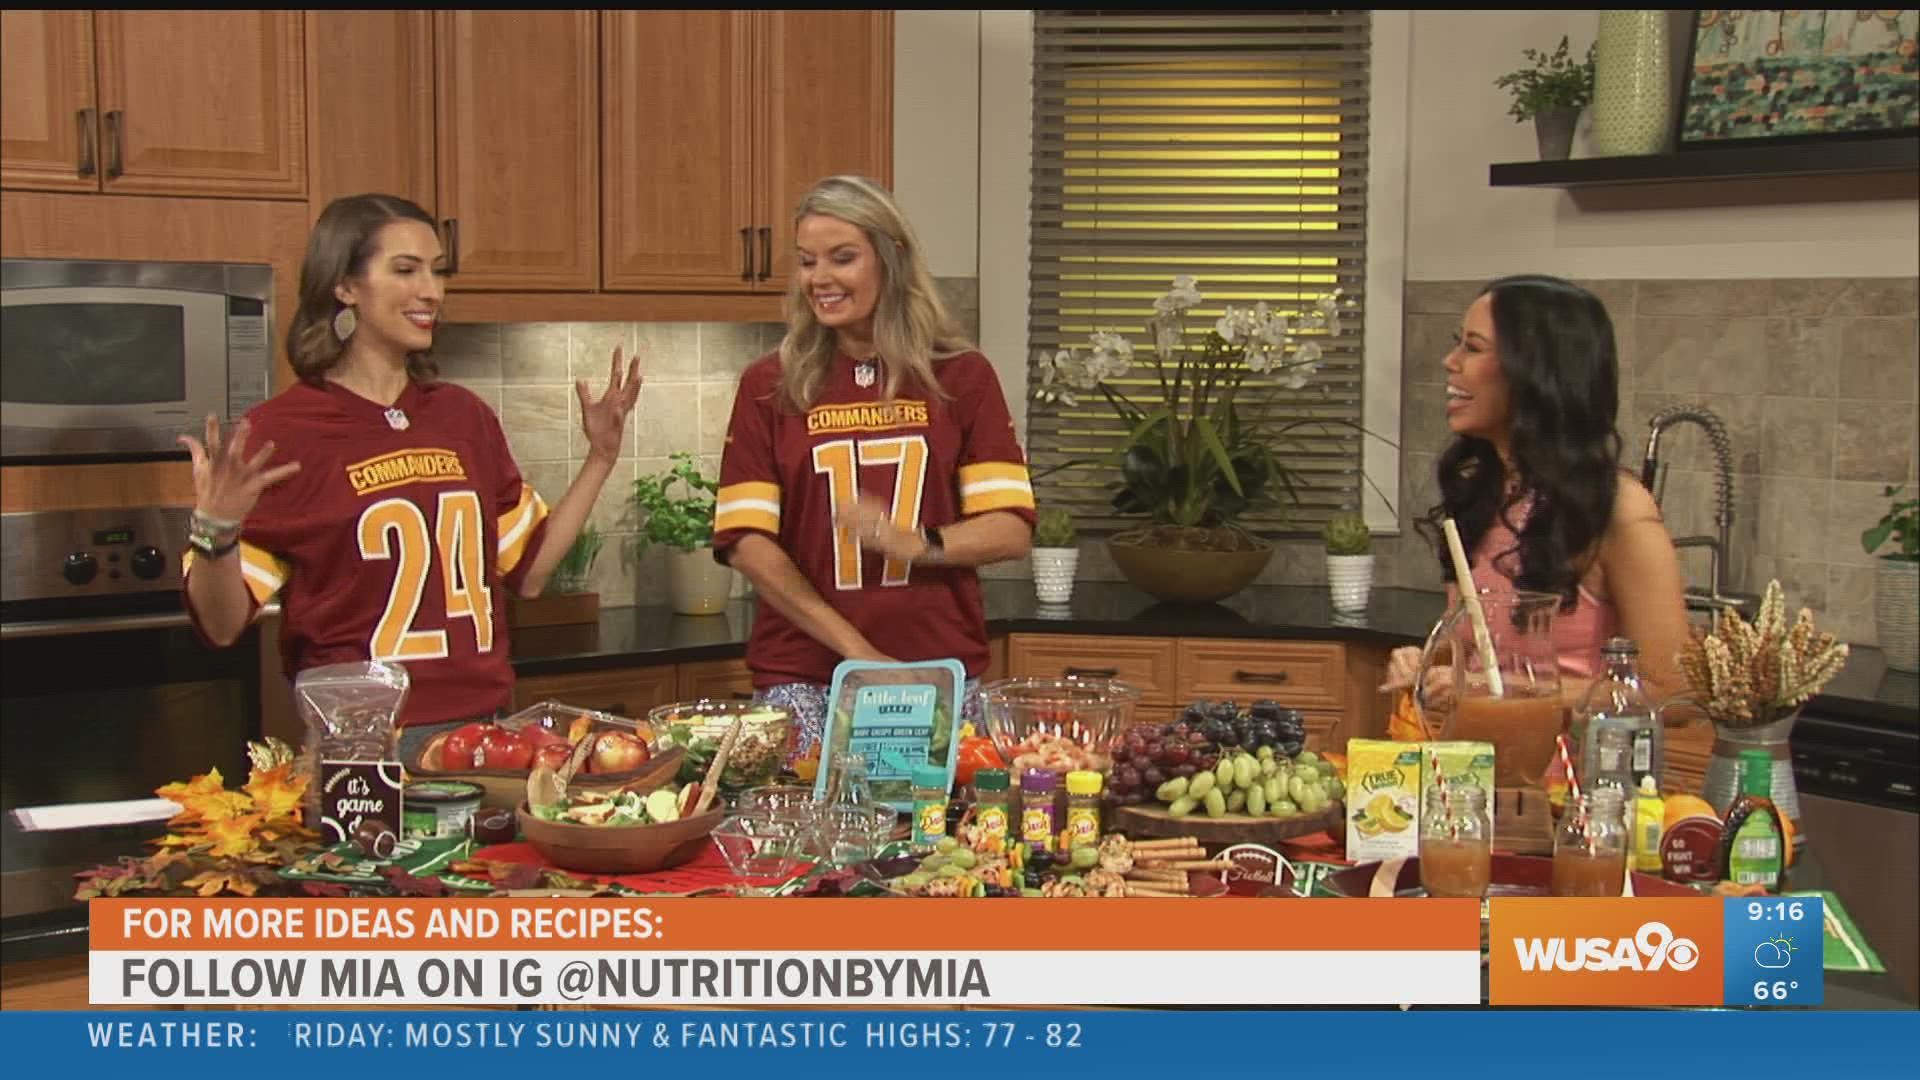 Mia Syn, MS, RDN of Nutrition by Mia stops by to help cheer on the Commanders and share tips for a fun and guilt-free football tailgate/party!!